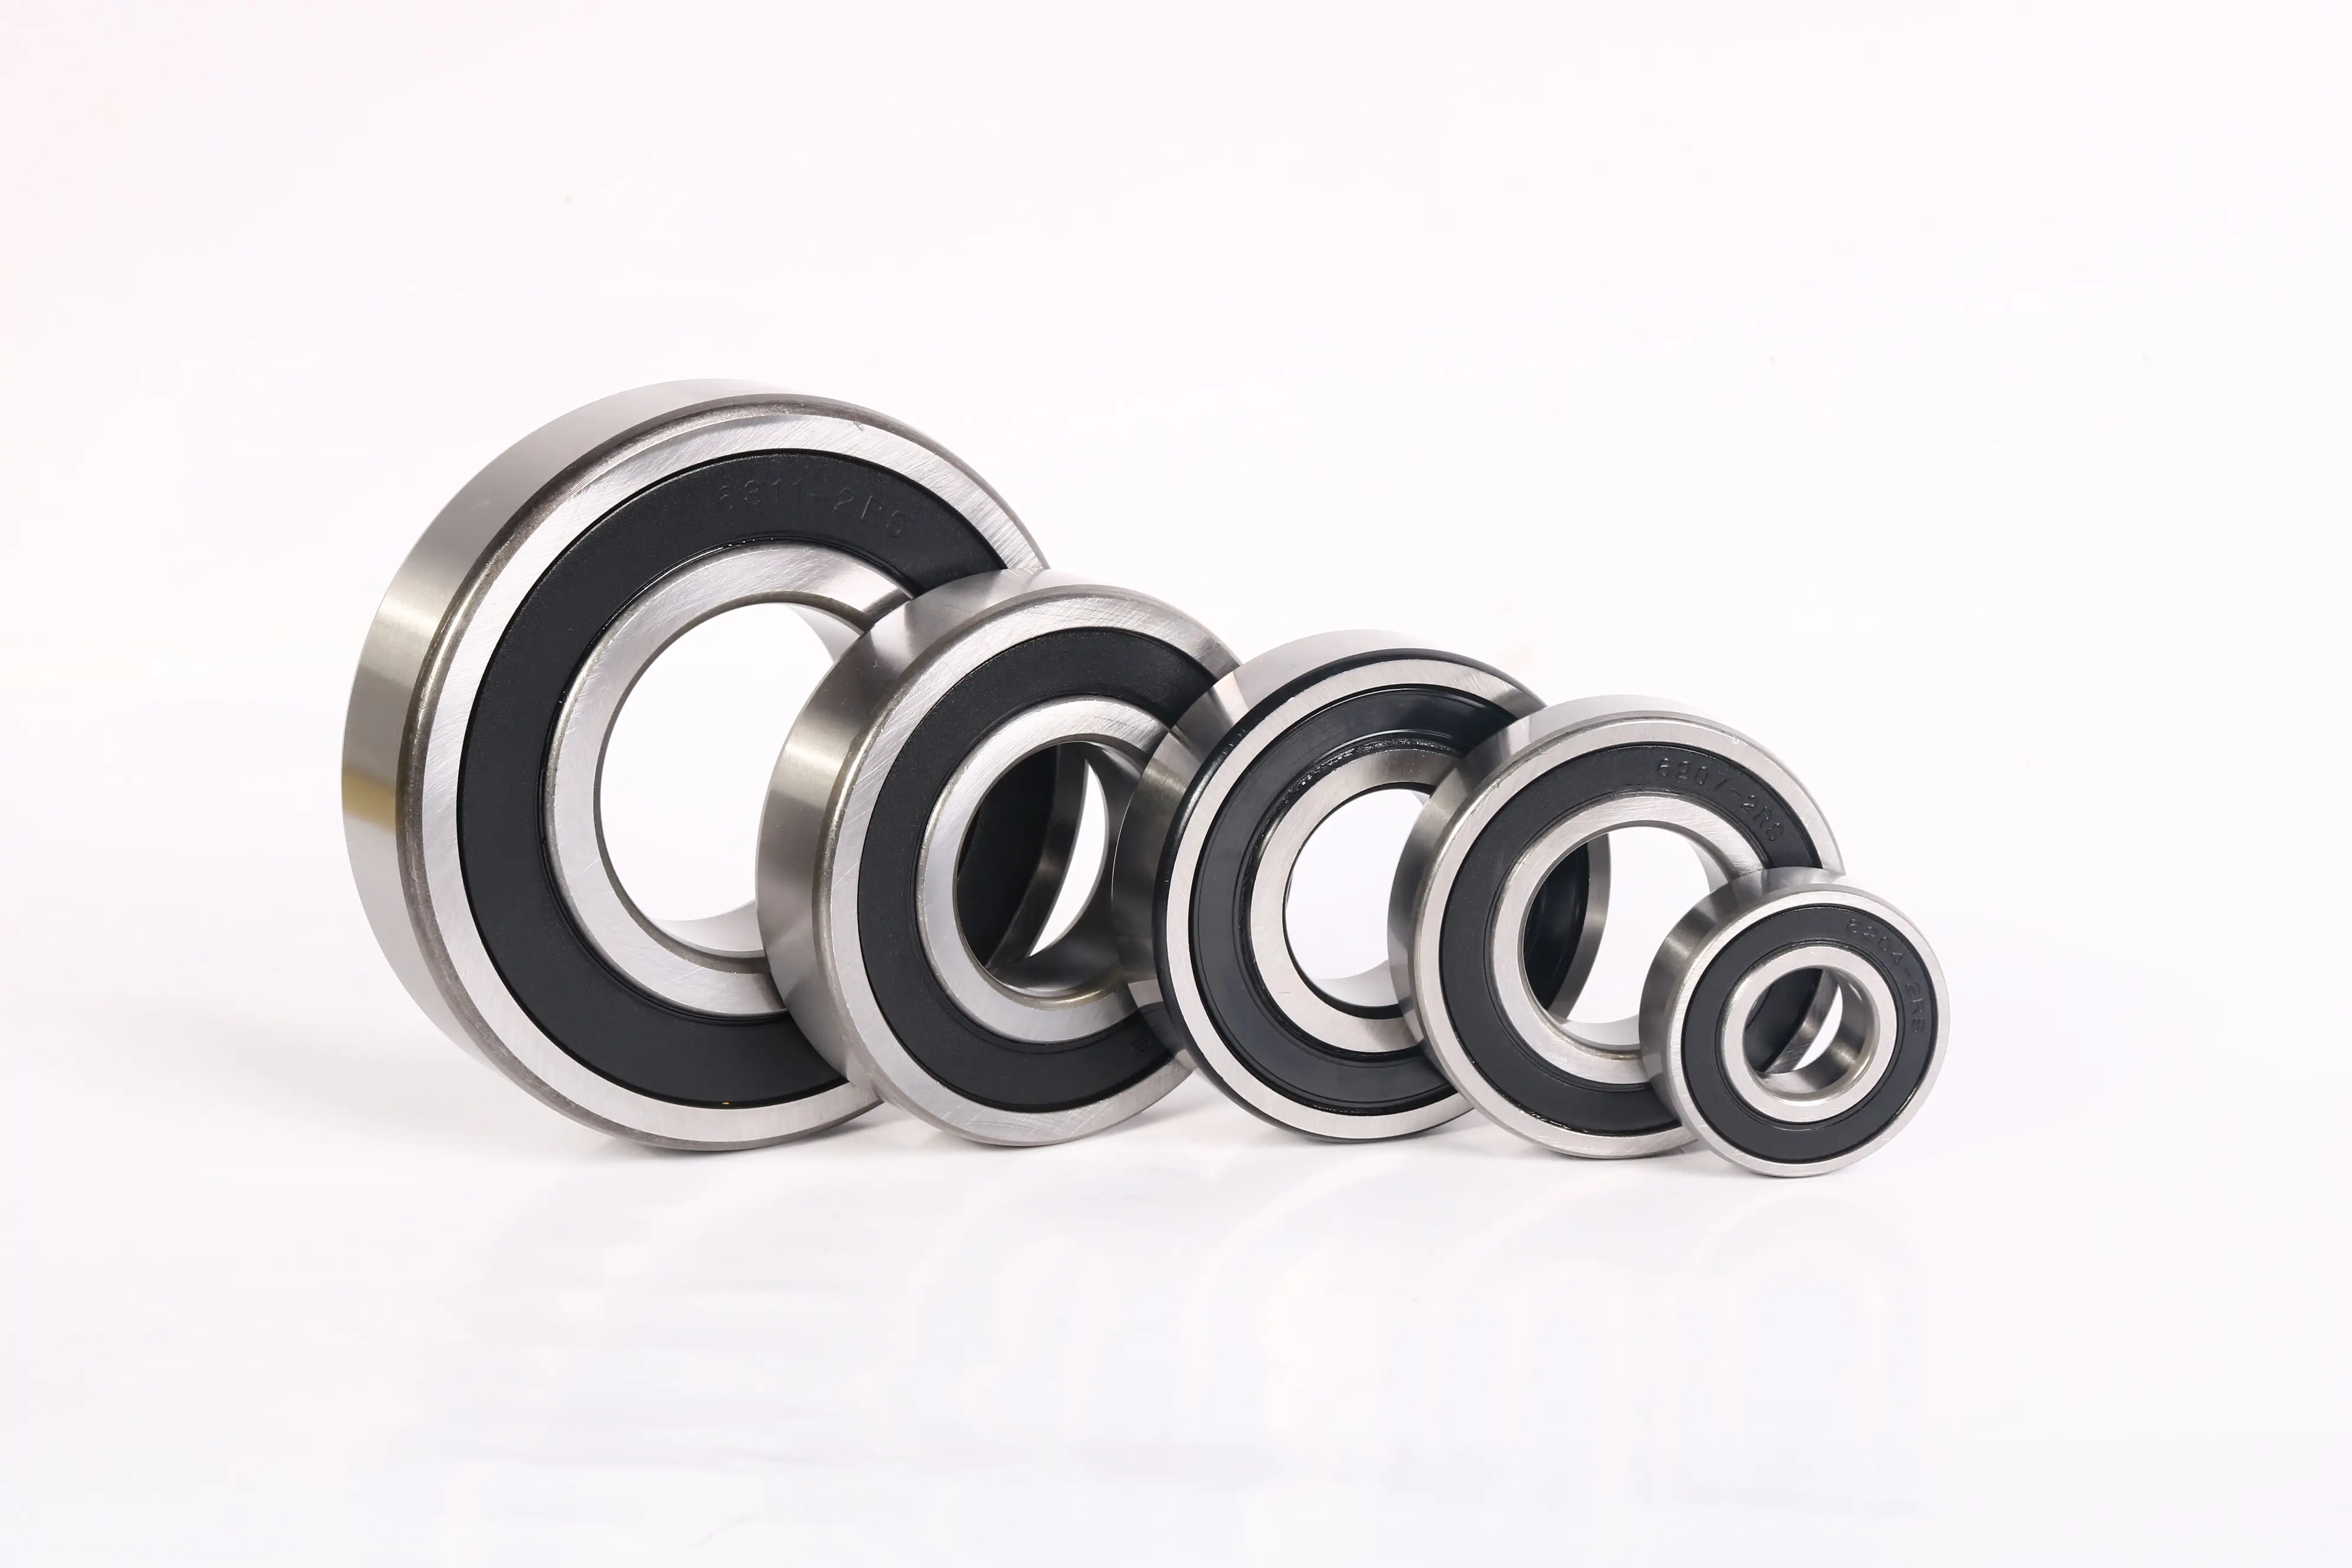 NS K Bearing 6200 ZZCM 10*30*9mm Deep Groove Ball Bearing For Bicycle Motorcycle Bearing NS K